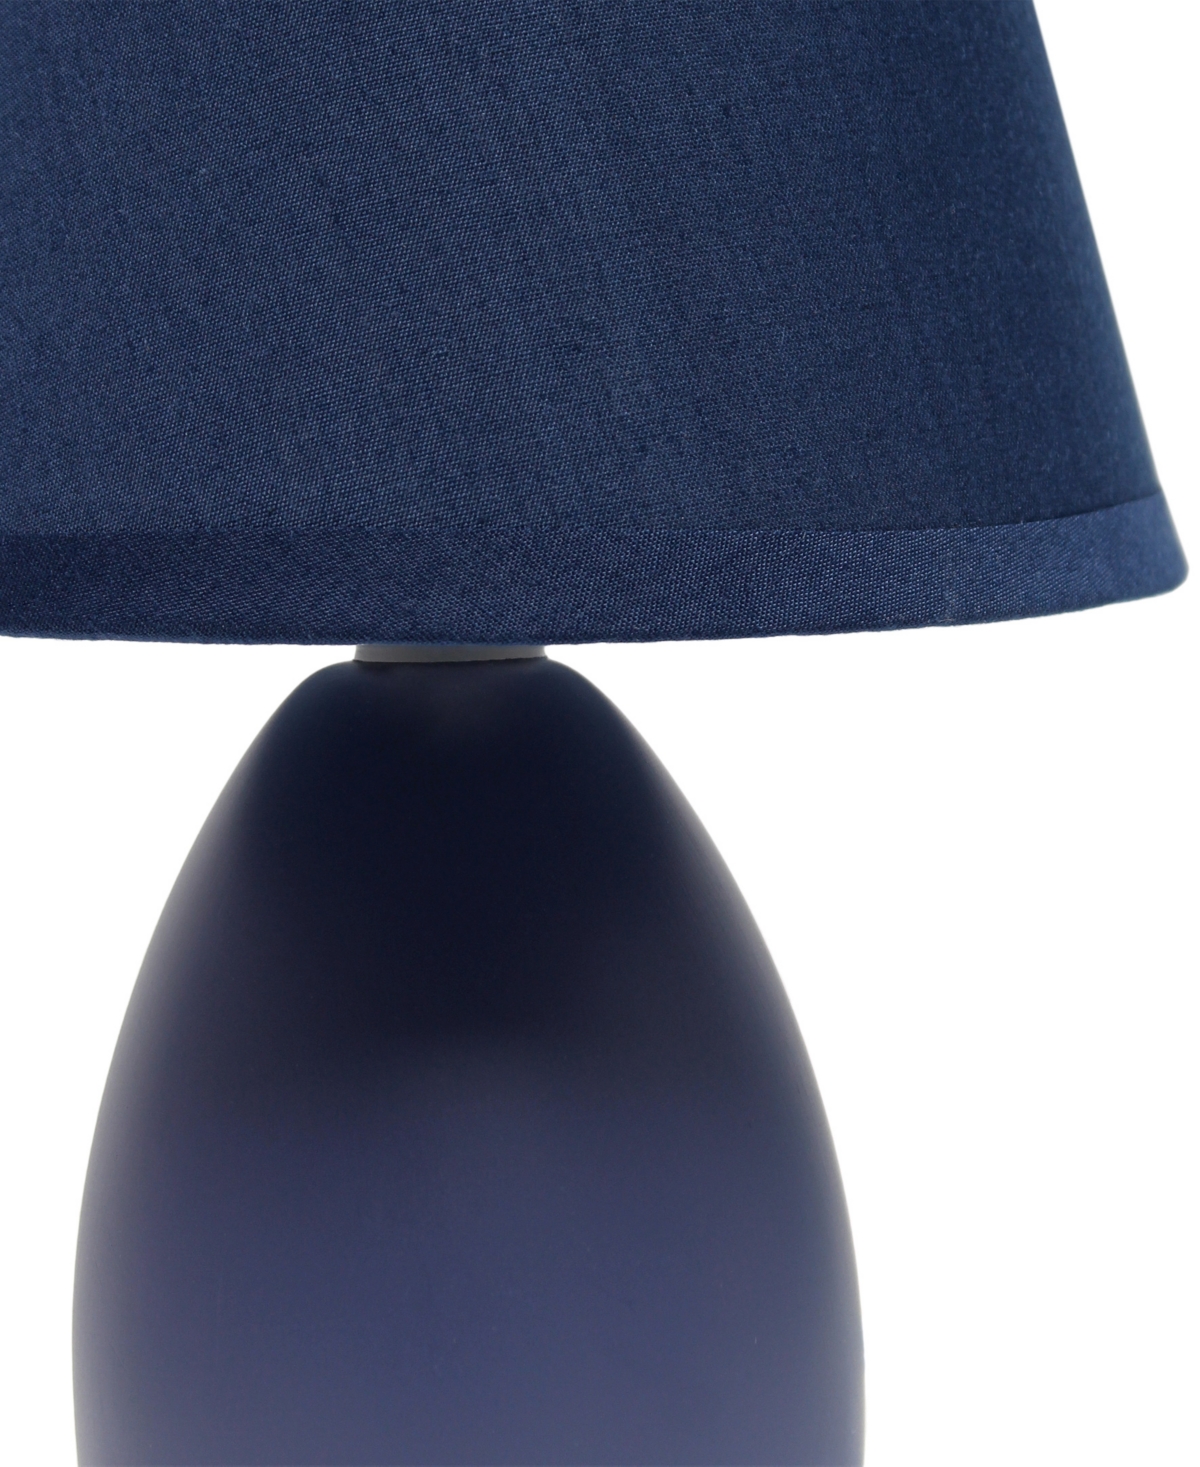 Shop Creekwood Home Nauru 9.45" Traditional Petite Ceramic Oblong Bedside Table Desk Lamp With Tapered Drum Fabric Shade In Purple